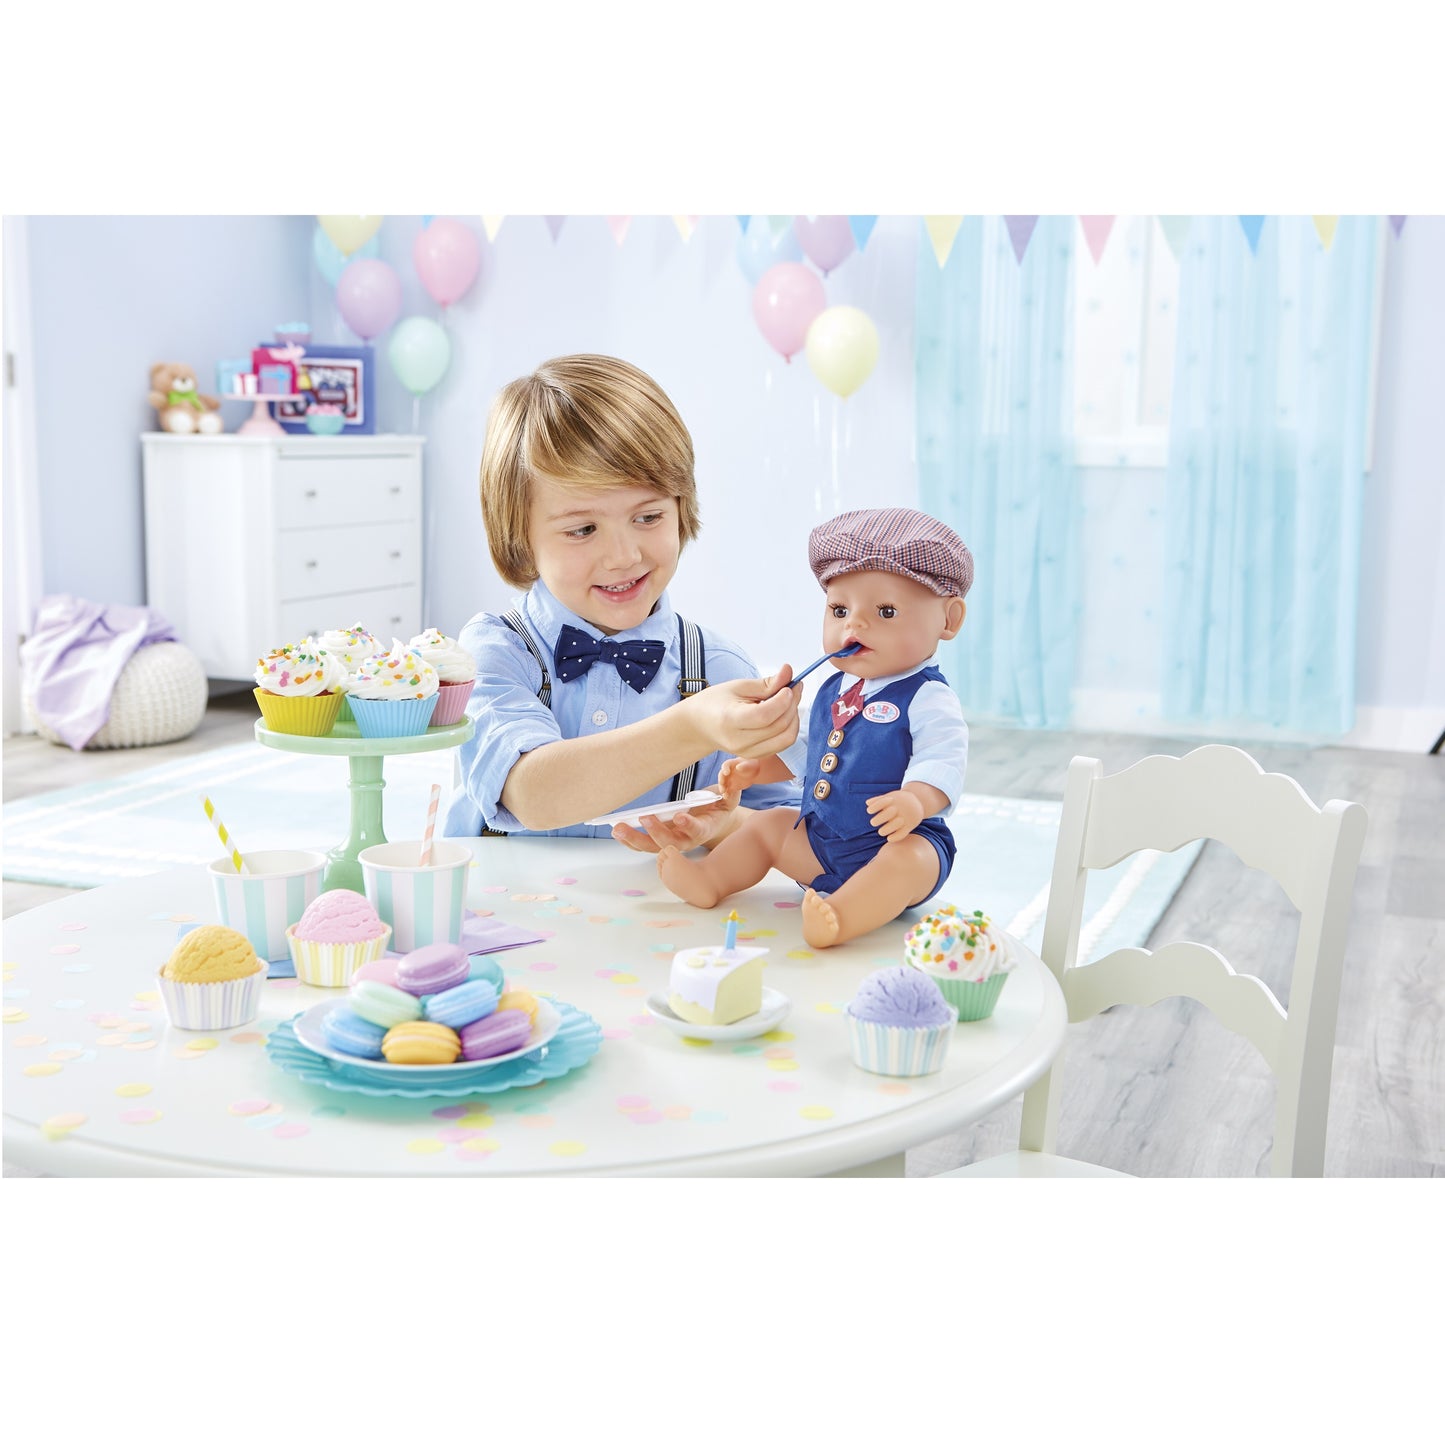 BABY born Interactive Boy Baby Doll Party Theme – Blue Eyes with 9 Ways to Nurture (Eats, Drinks, Cries, Sleeps, Bathes, and Wets)